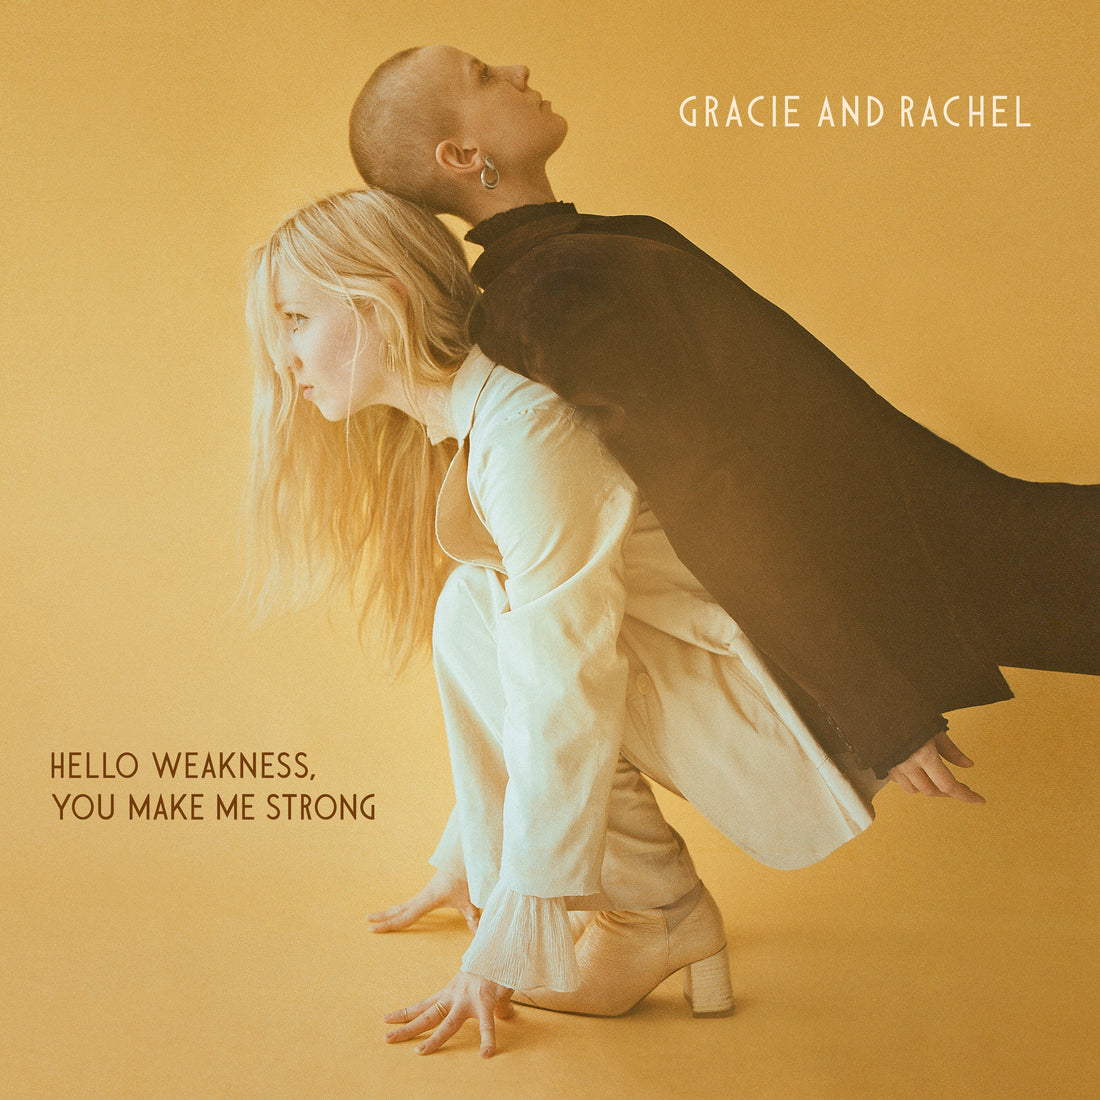 Gracie and Rachel's new album Hello Weakness, You Make Me Strong out now